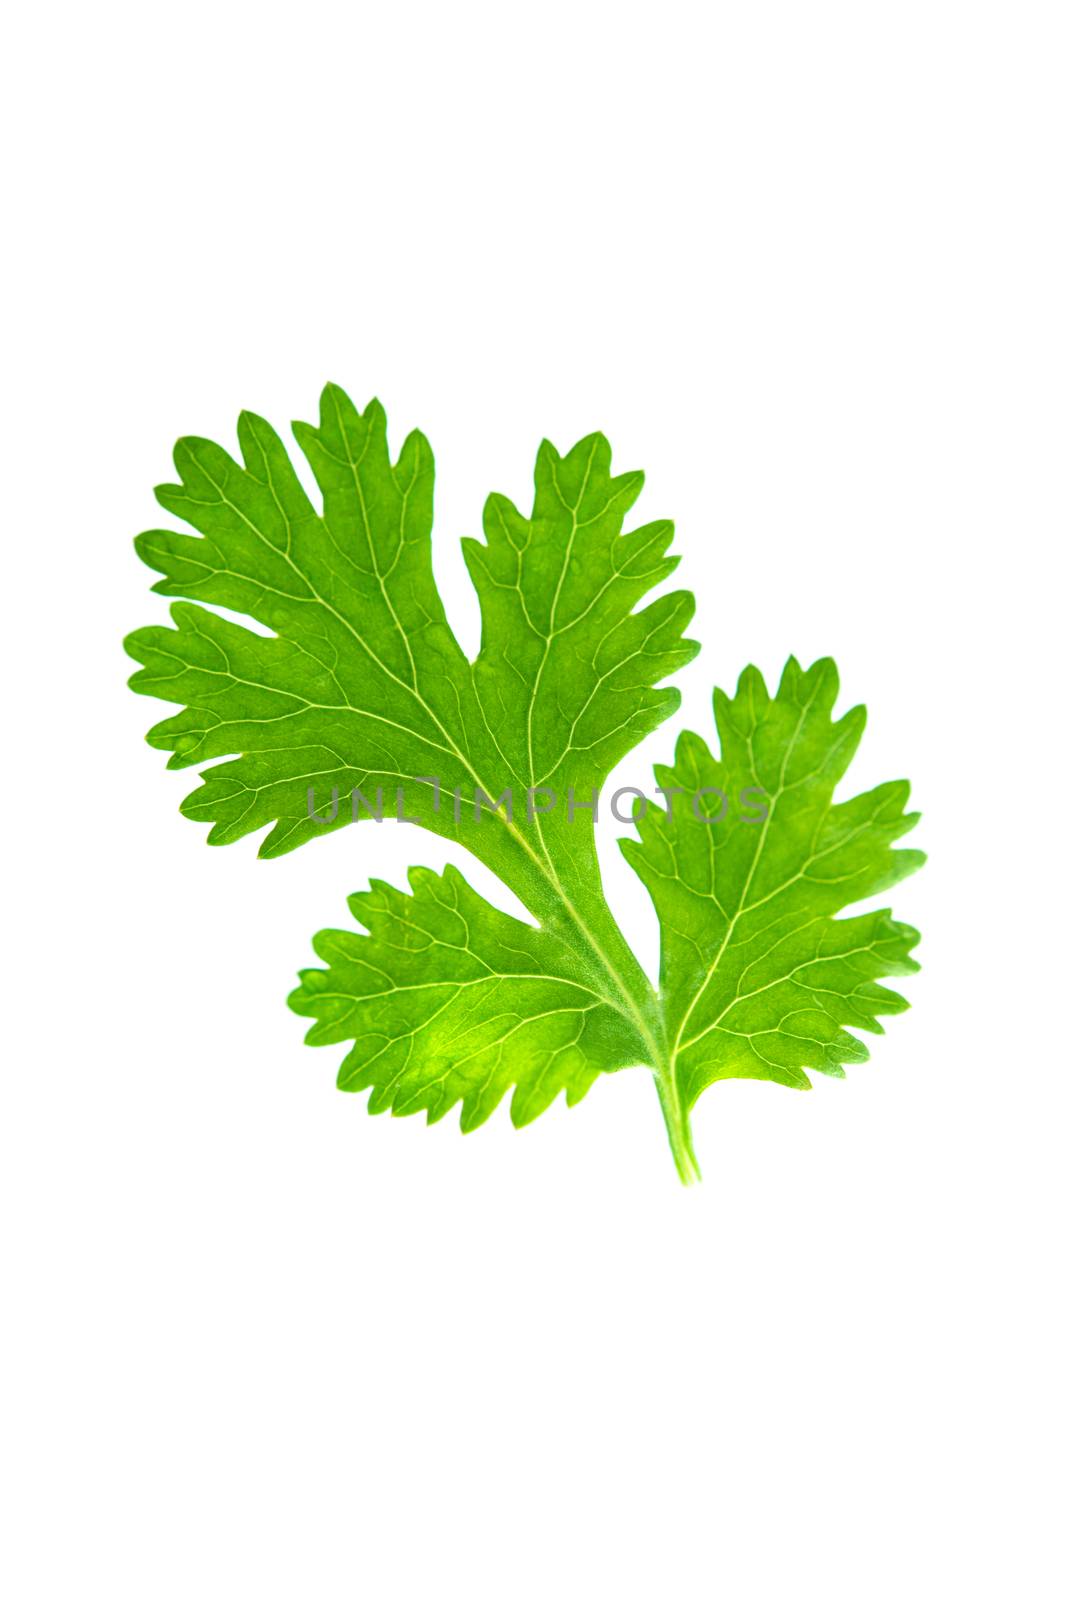 Parsley herb isolated on white background.